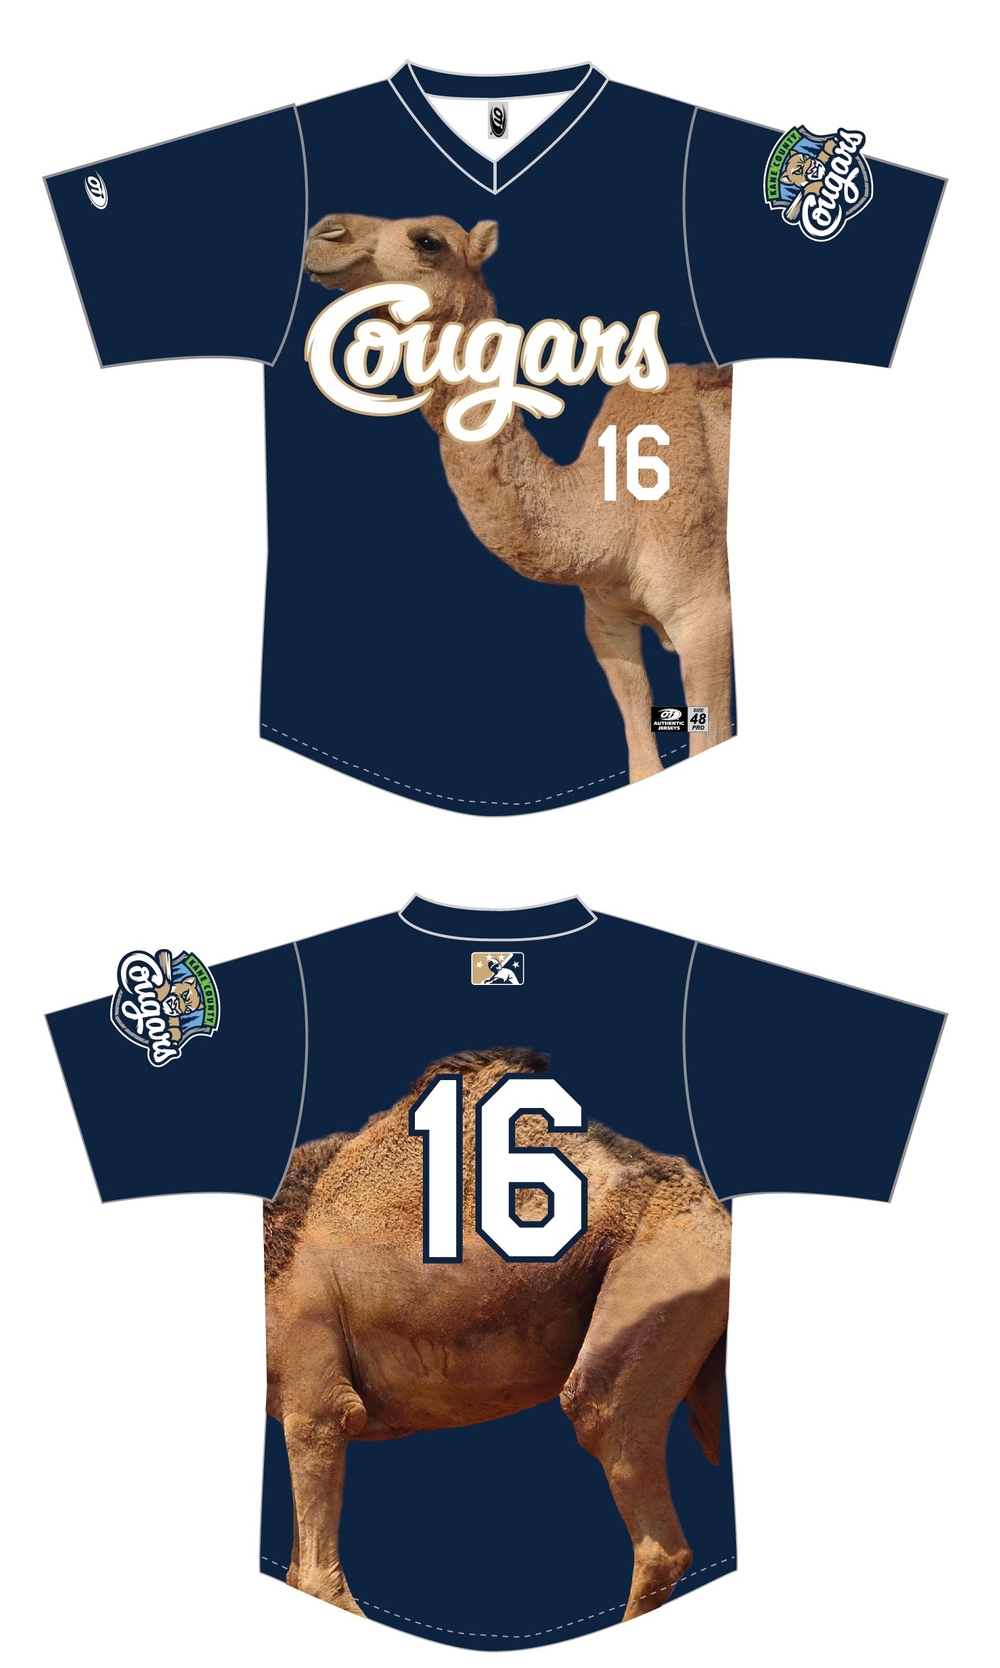 kane county cougars jersey